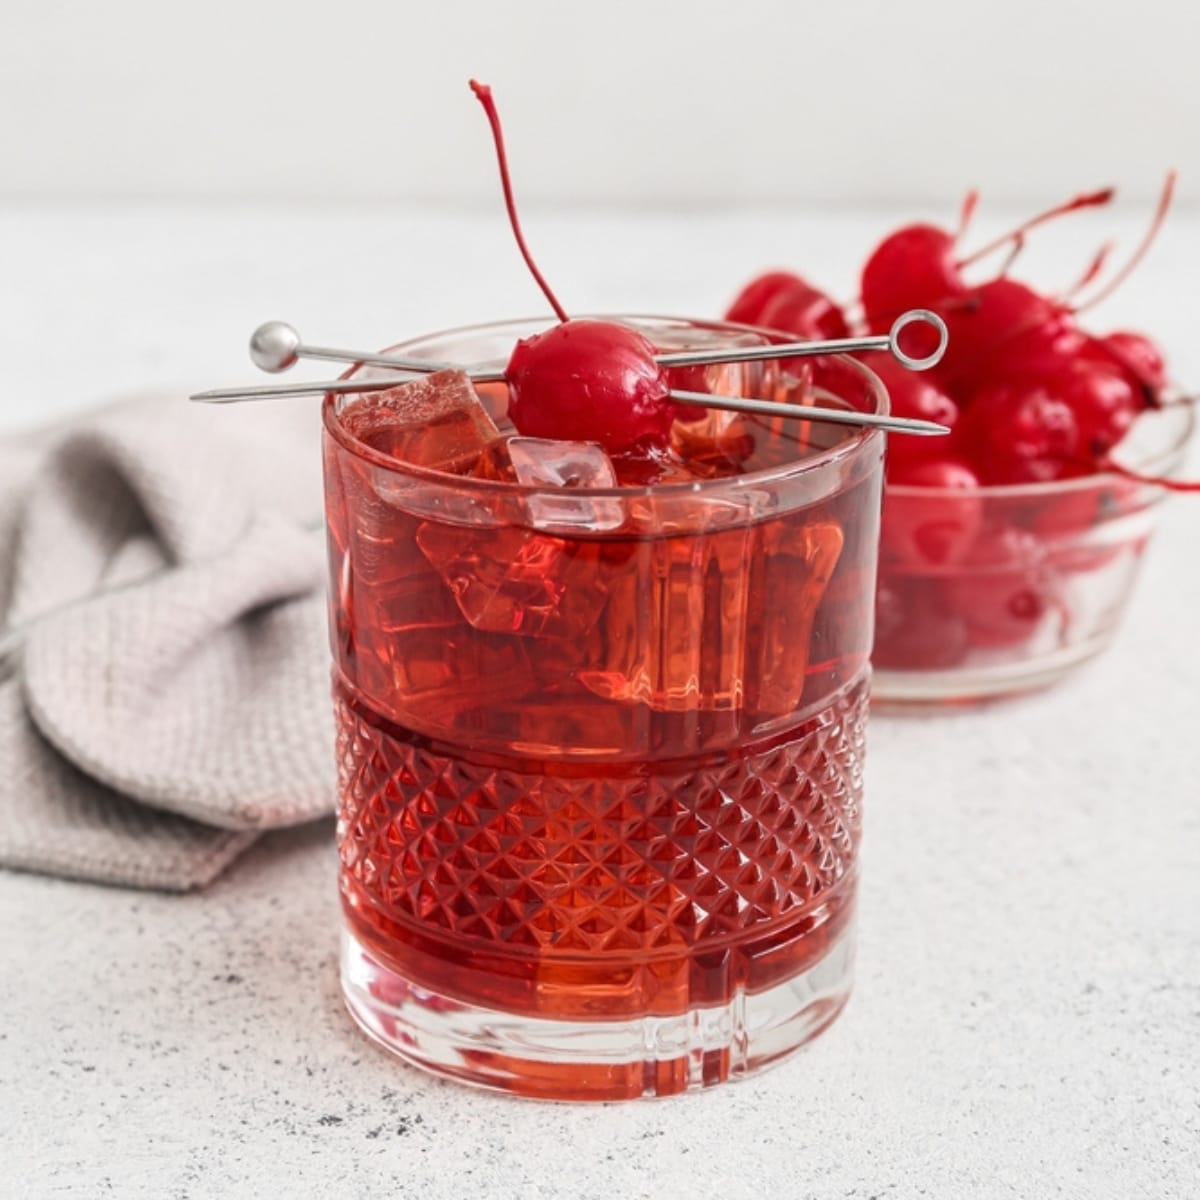 Manhattan Cocktails on the Rock With Cherries on Top